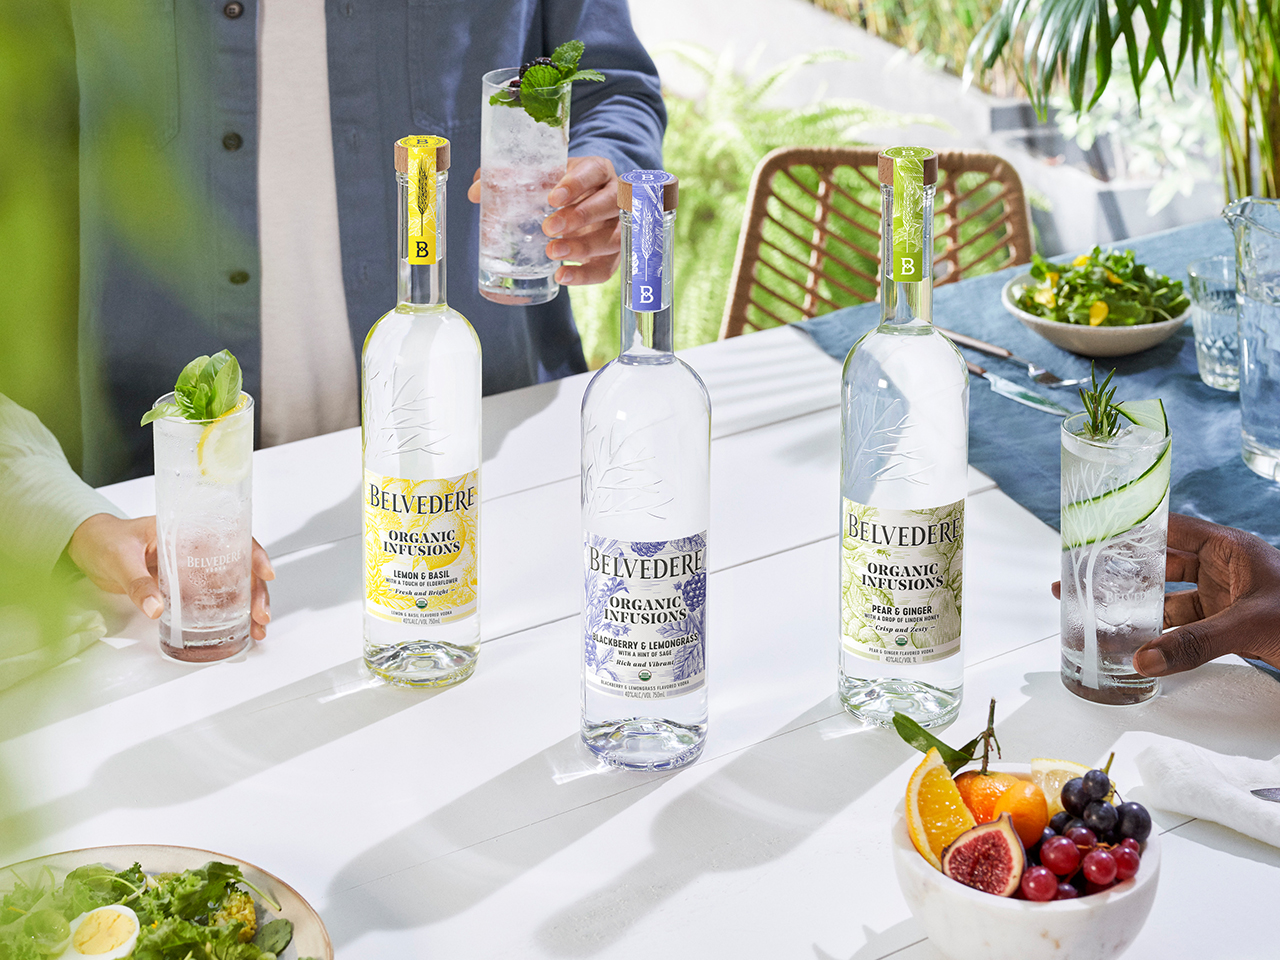 Belvedere Vodka on X: Belvedere Organic Infusions is crafted with only  organic ingredients. A new spirit bursting with natural fruit and botanical  flavors from #BelvedereVodka! ​ ​ #BelvedereOrganicInfusions​ ​ Enjoy  drinking respon